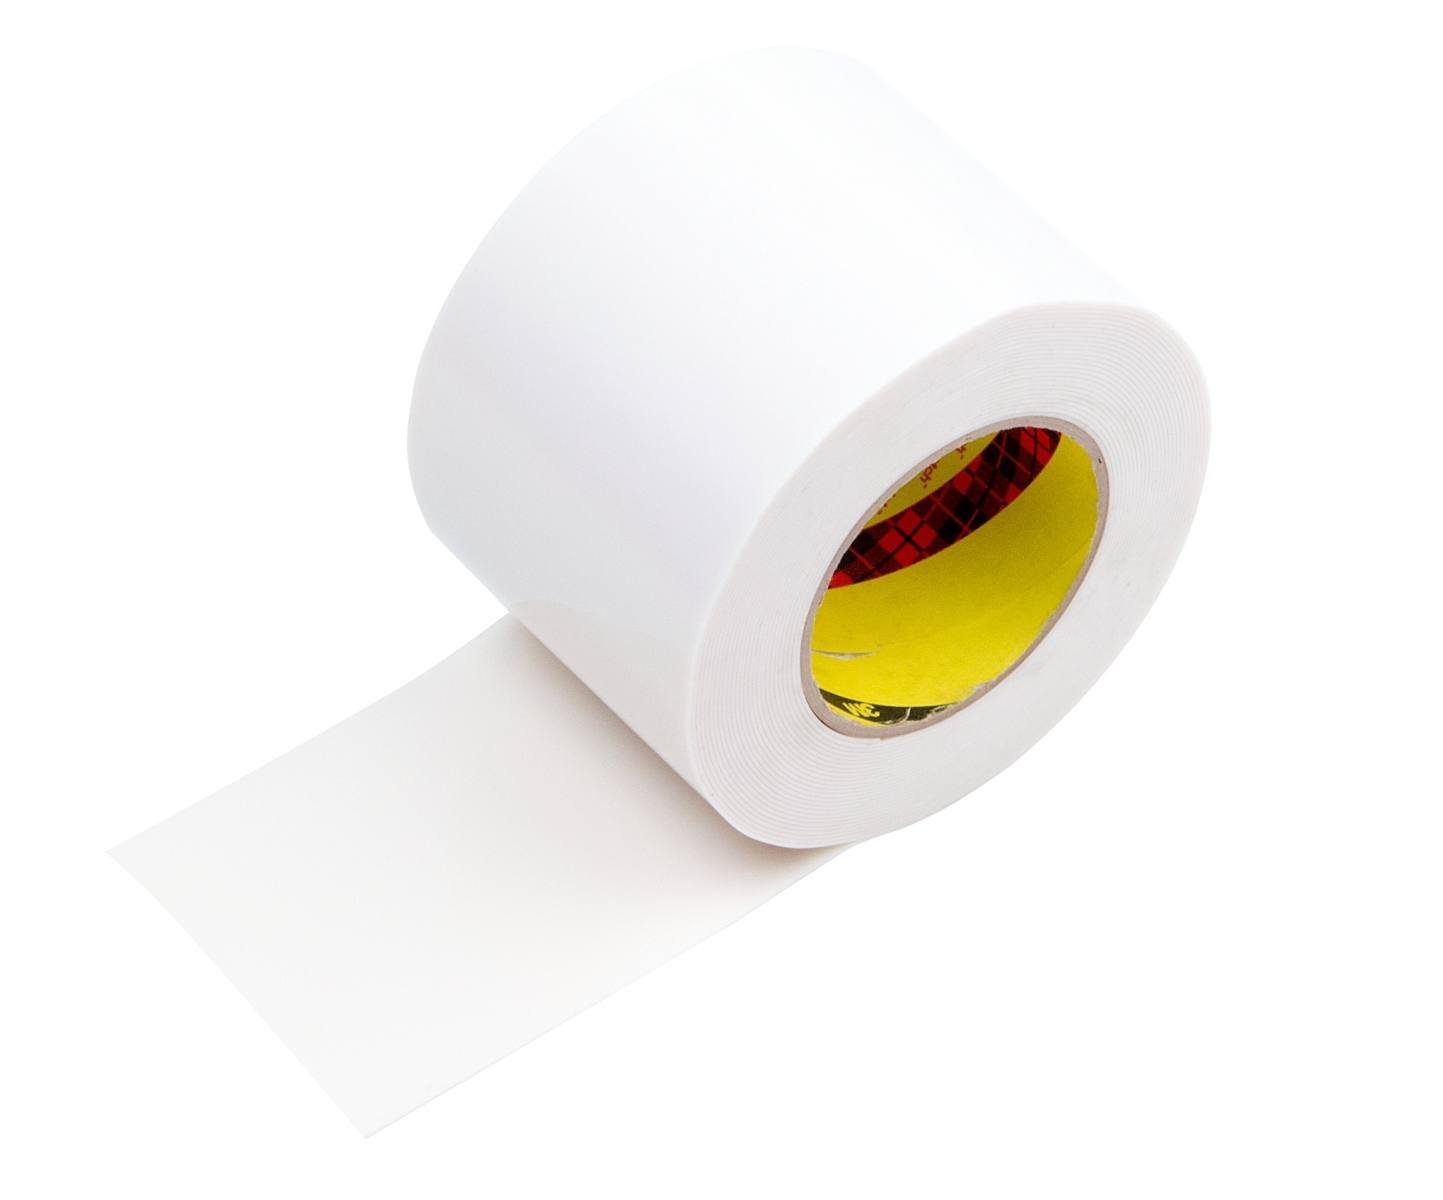 3M Thermally conductive adhesive film 8926-05 19 mm x 40 m, 0.500 mm